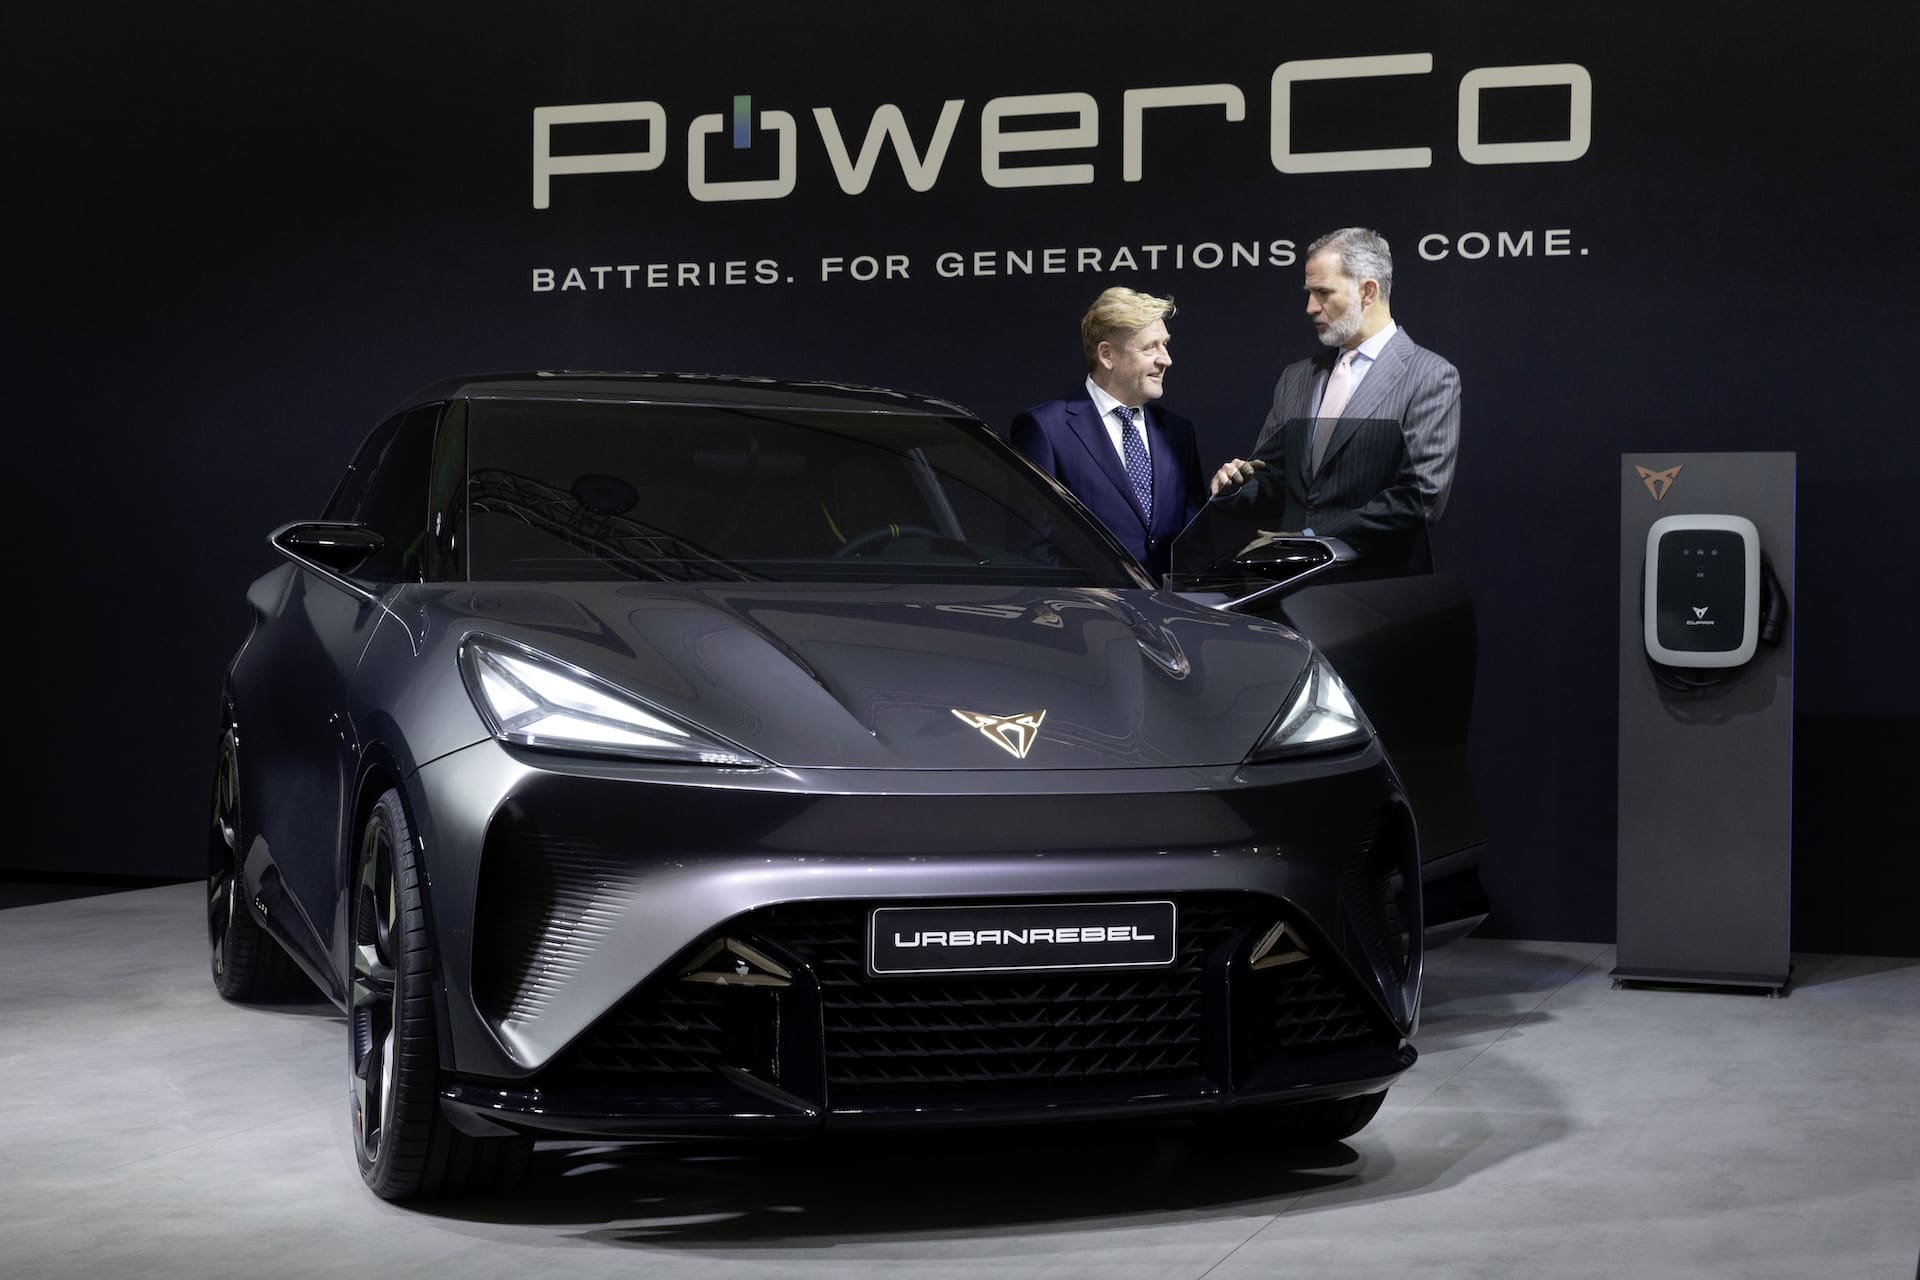 PowerCo SE Announces Construction of Gigafactory Valencia for Sustainable Battery Production